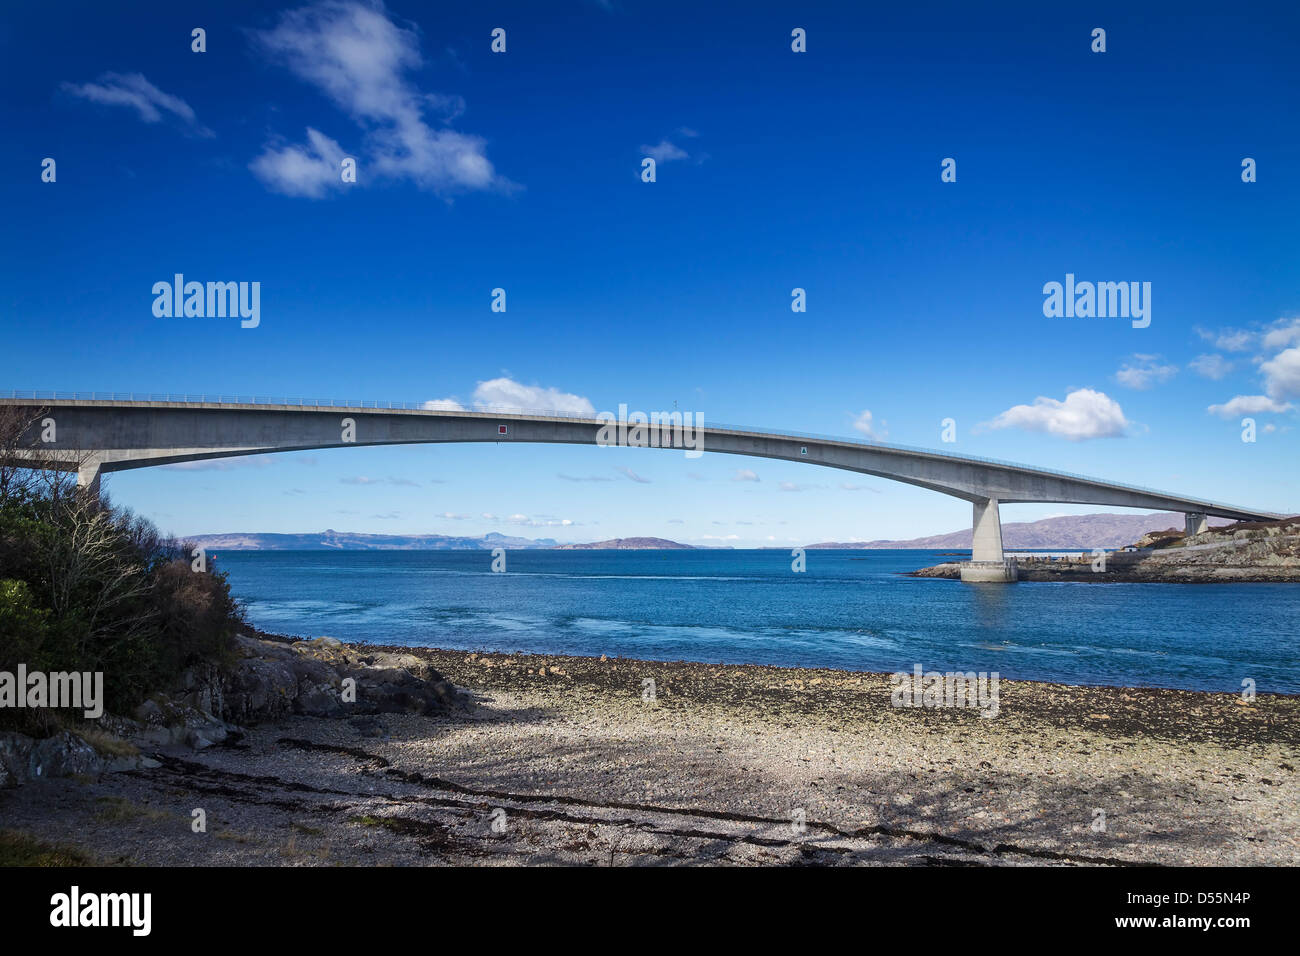 The Skye Bridge over Loch Alsh connecting mainland Highland Scotland with the Isle of Skye. Stock Photo